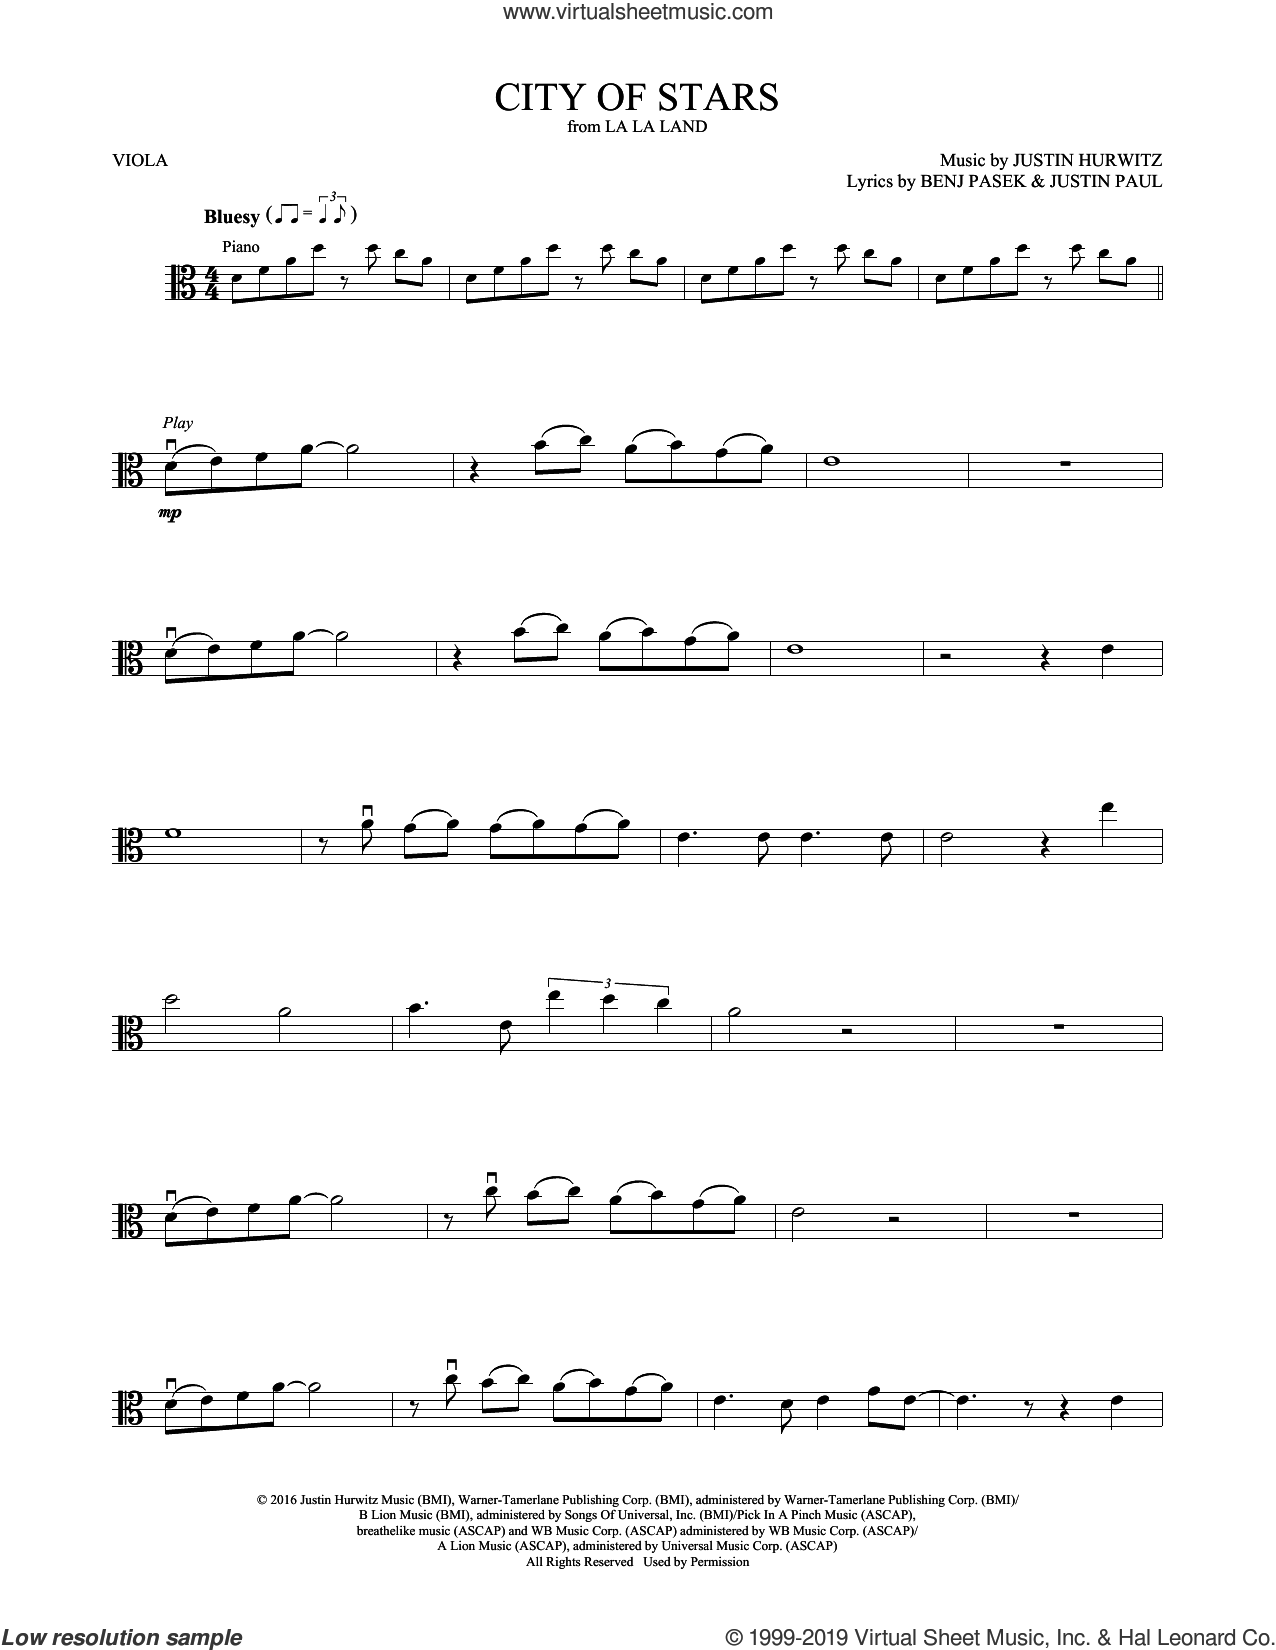 above Hopeful Governable Stone - City of Stars (from La La Land) sheet music for viola solo